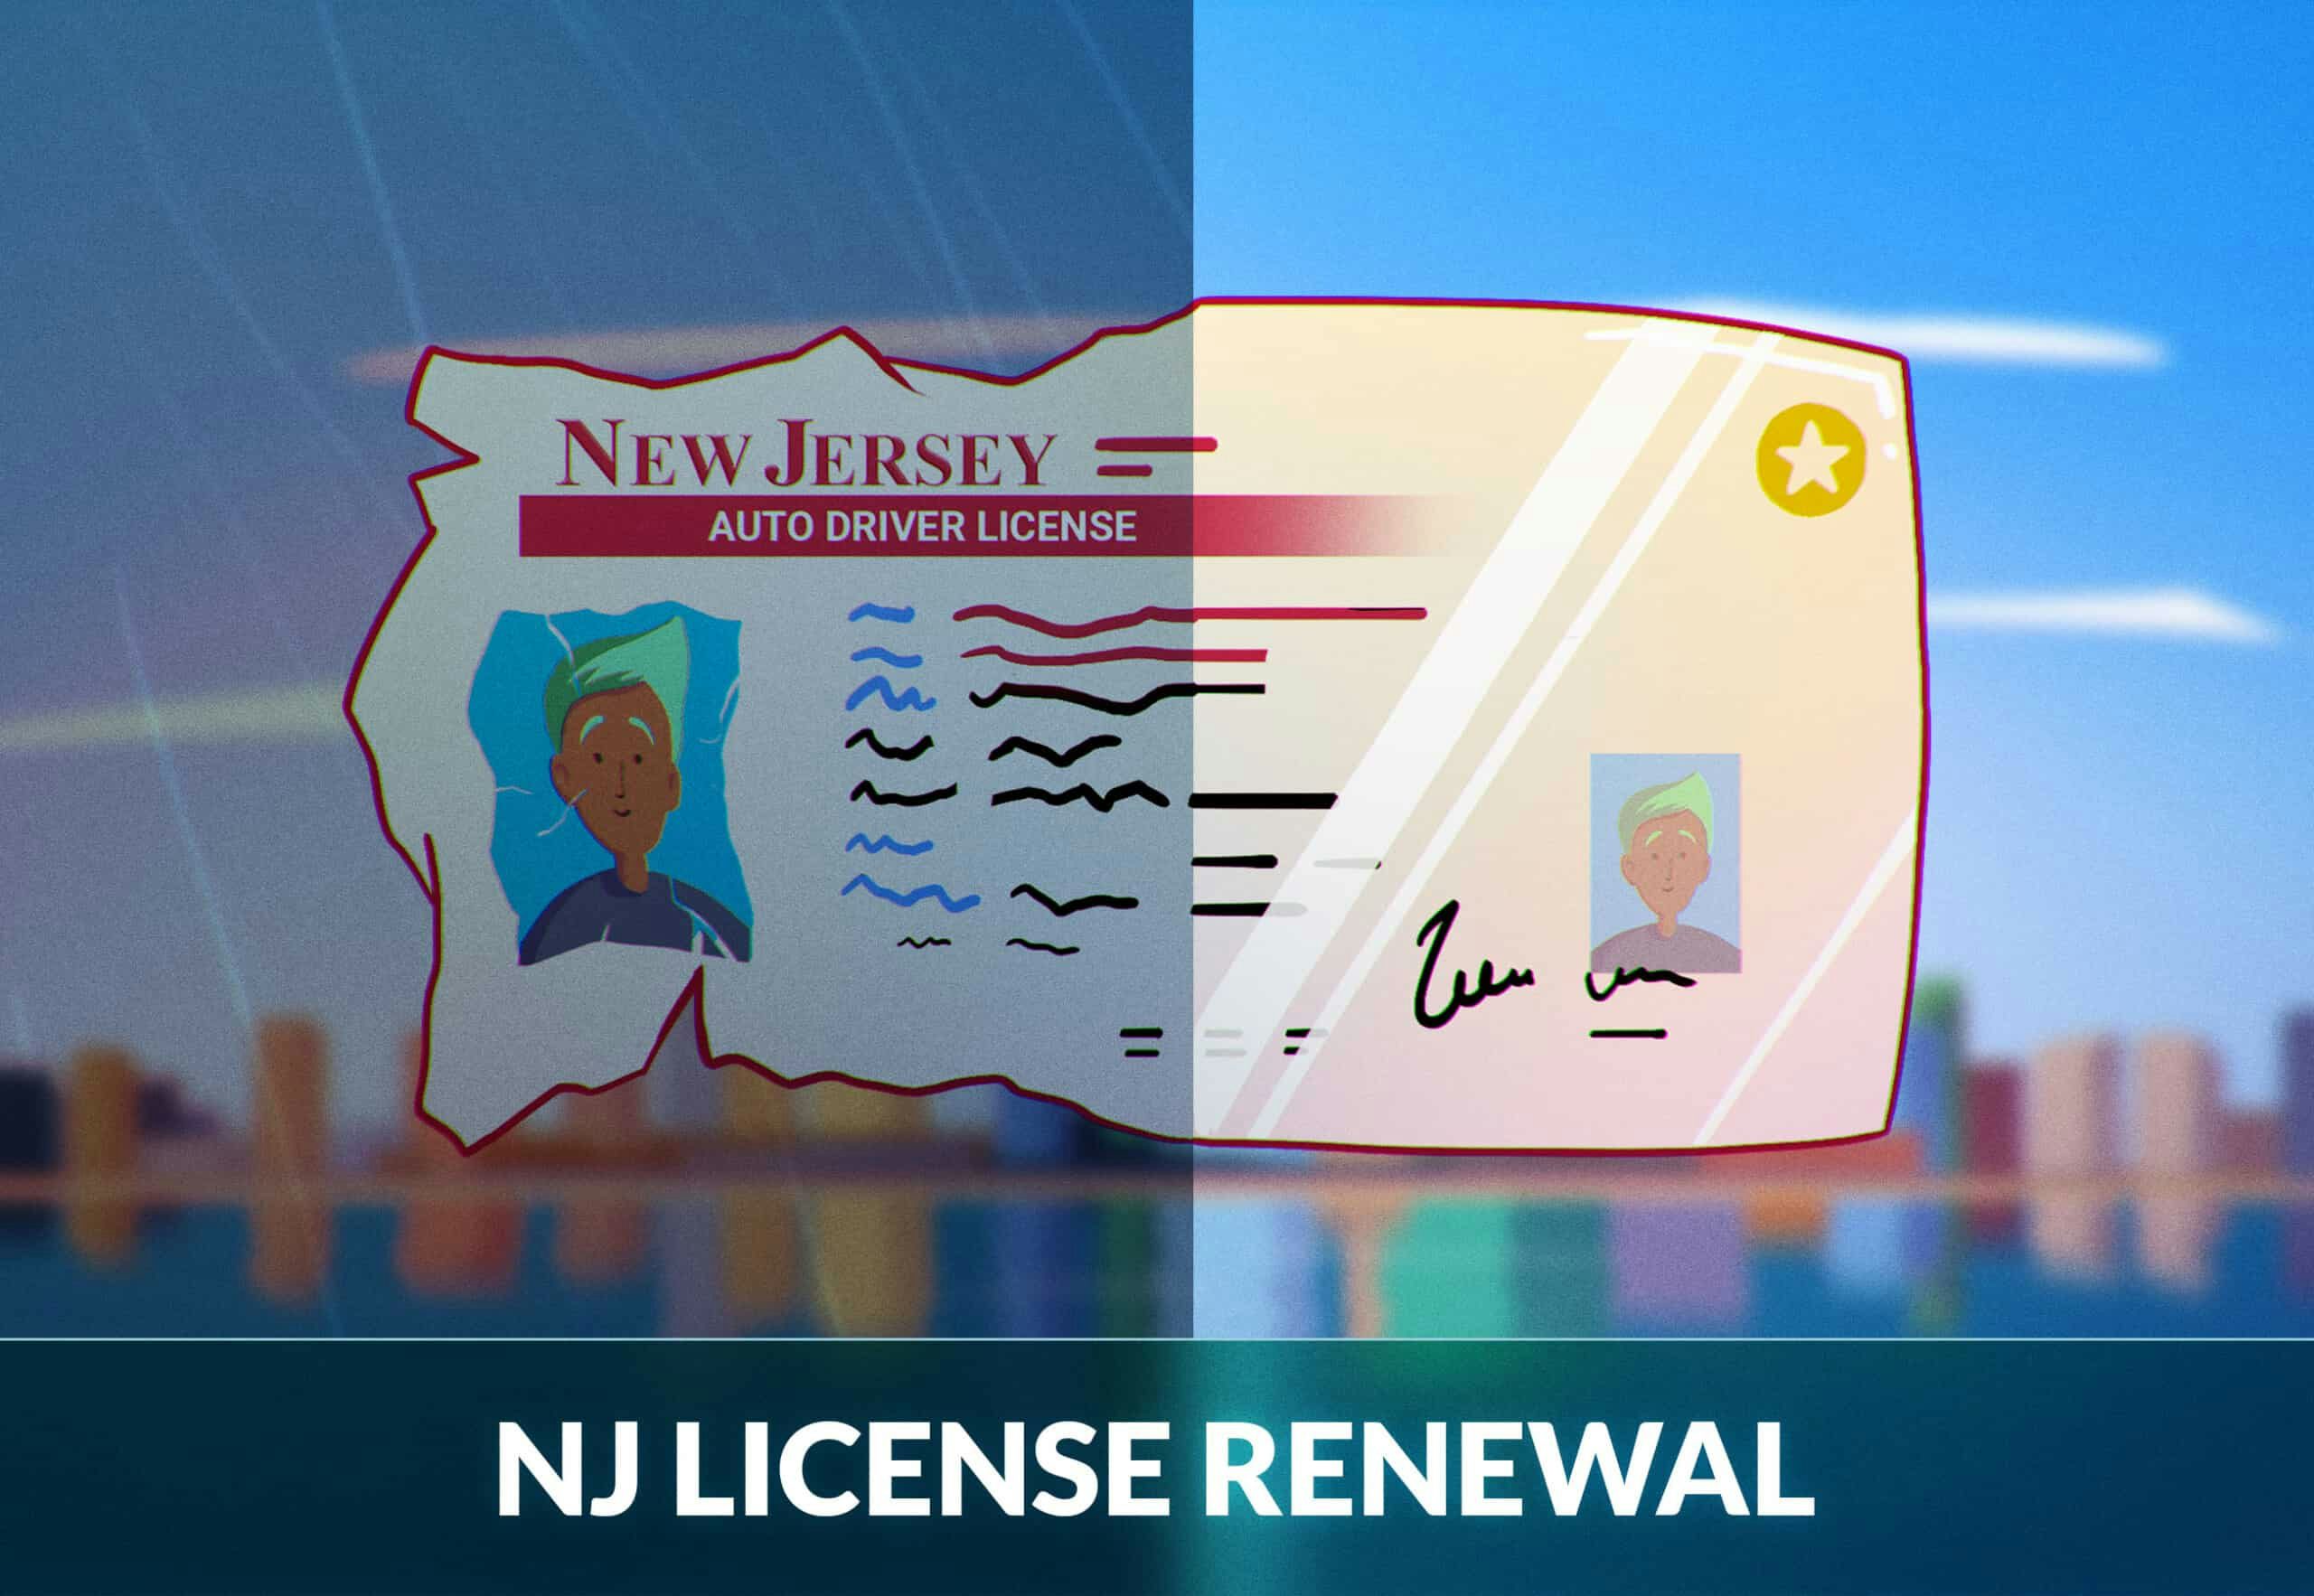 can i check my driver's license status online nj